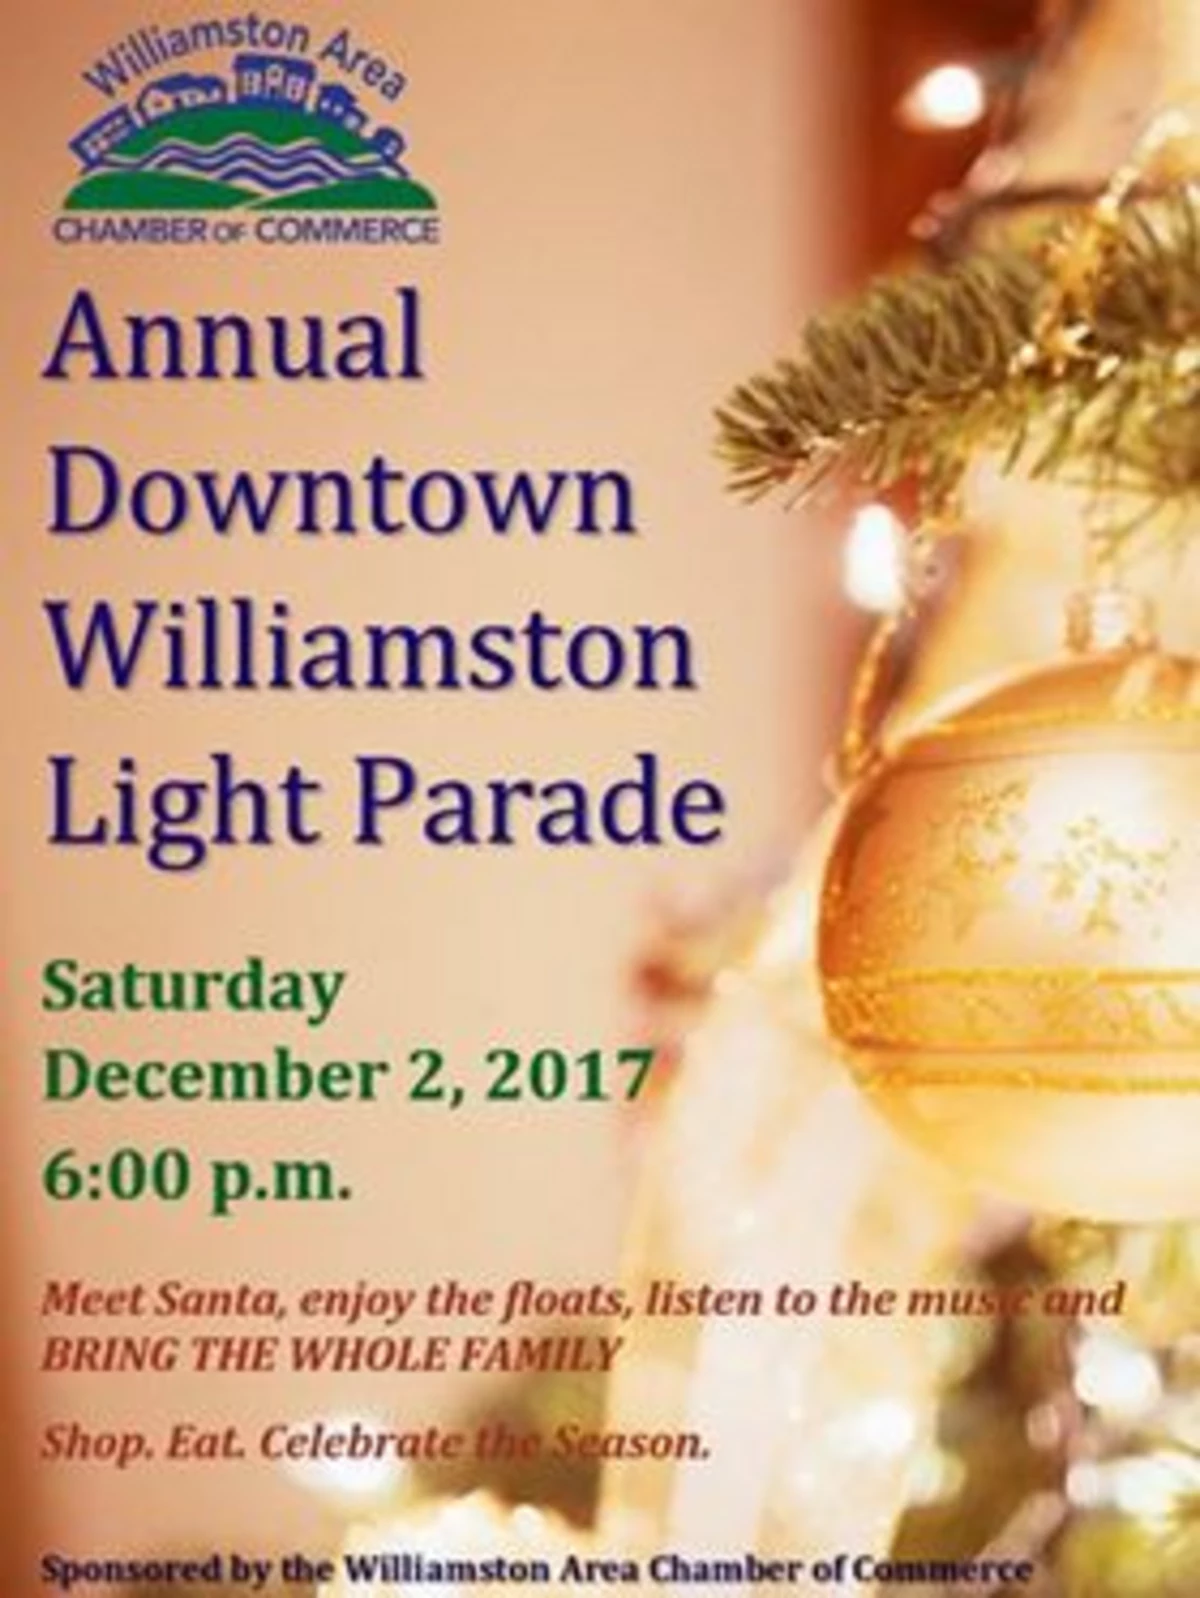 Light Parade and SANTA in Williamston This Weekend